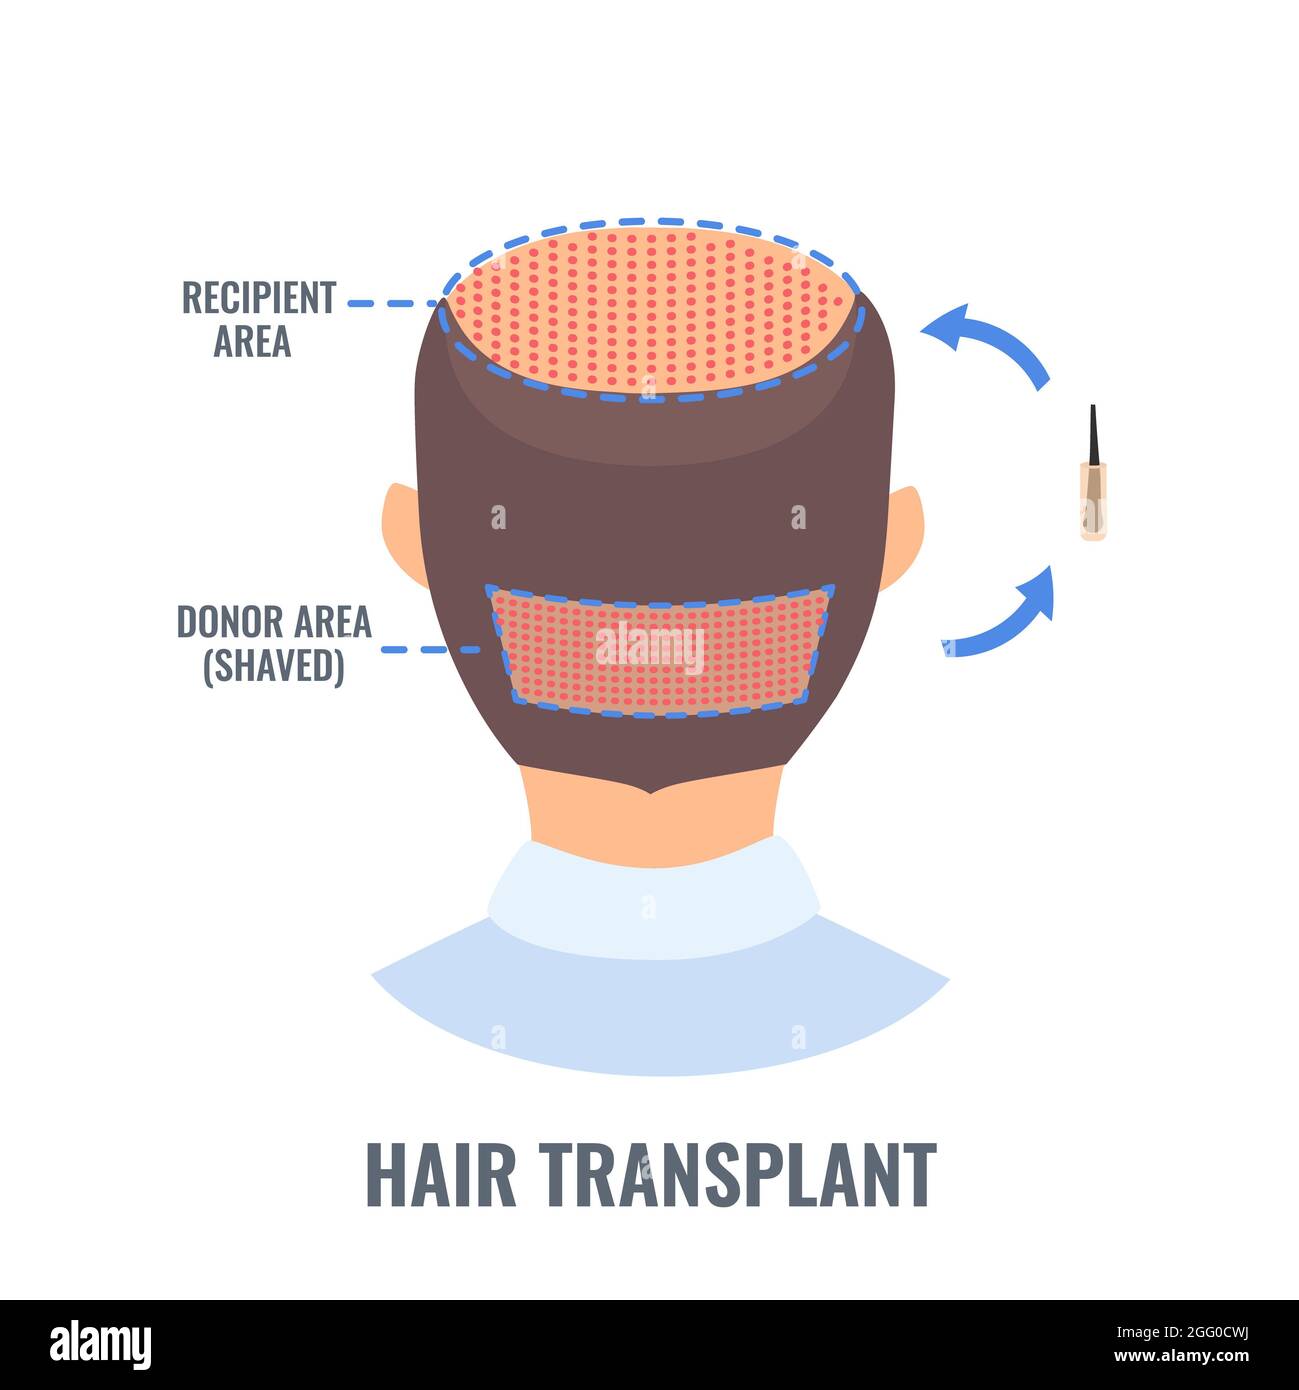 Hair transplantation, illustration. Follicular unit extraction (FUE) hair transplant donor site and recipient area. Stock Photo